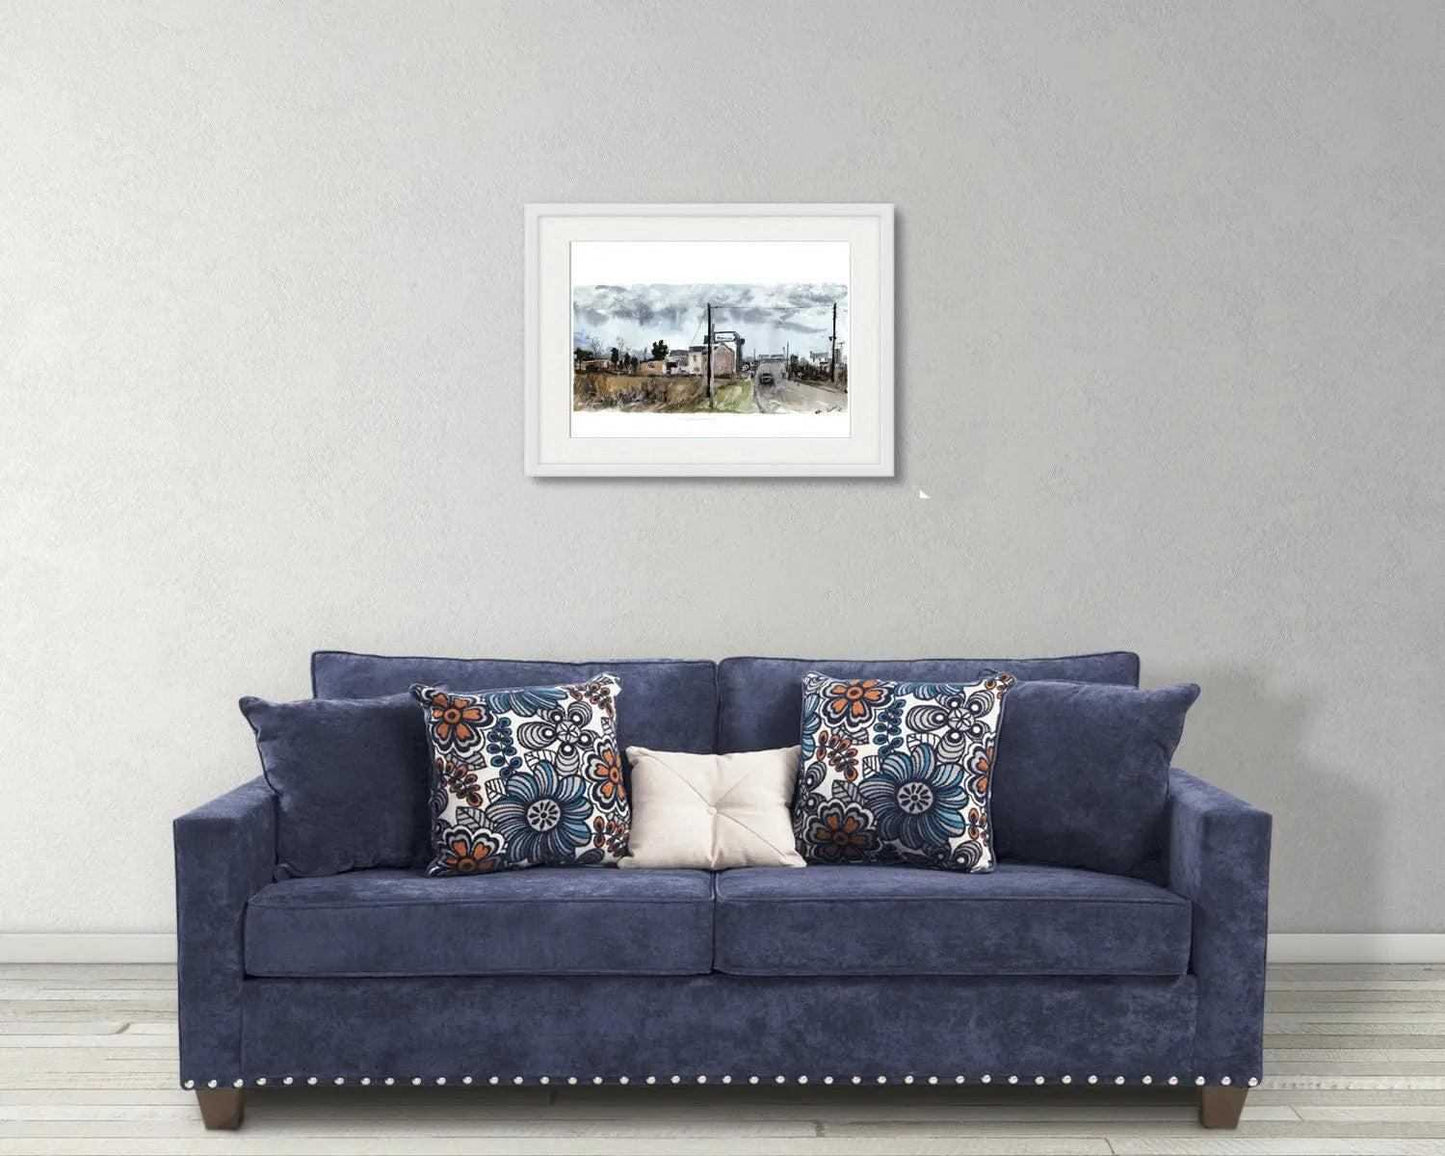 Welsh farm Painting landscape Bancffosfelen scene Numbered limited edition Giclee Print of a Watercolour Painting ArtbyMyleslaurence